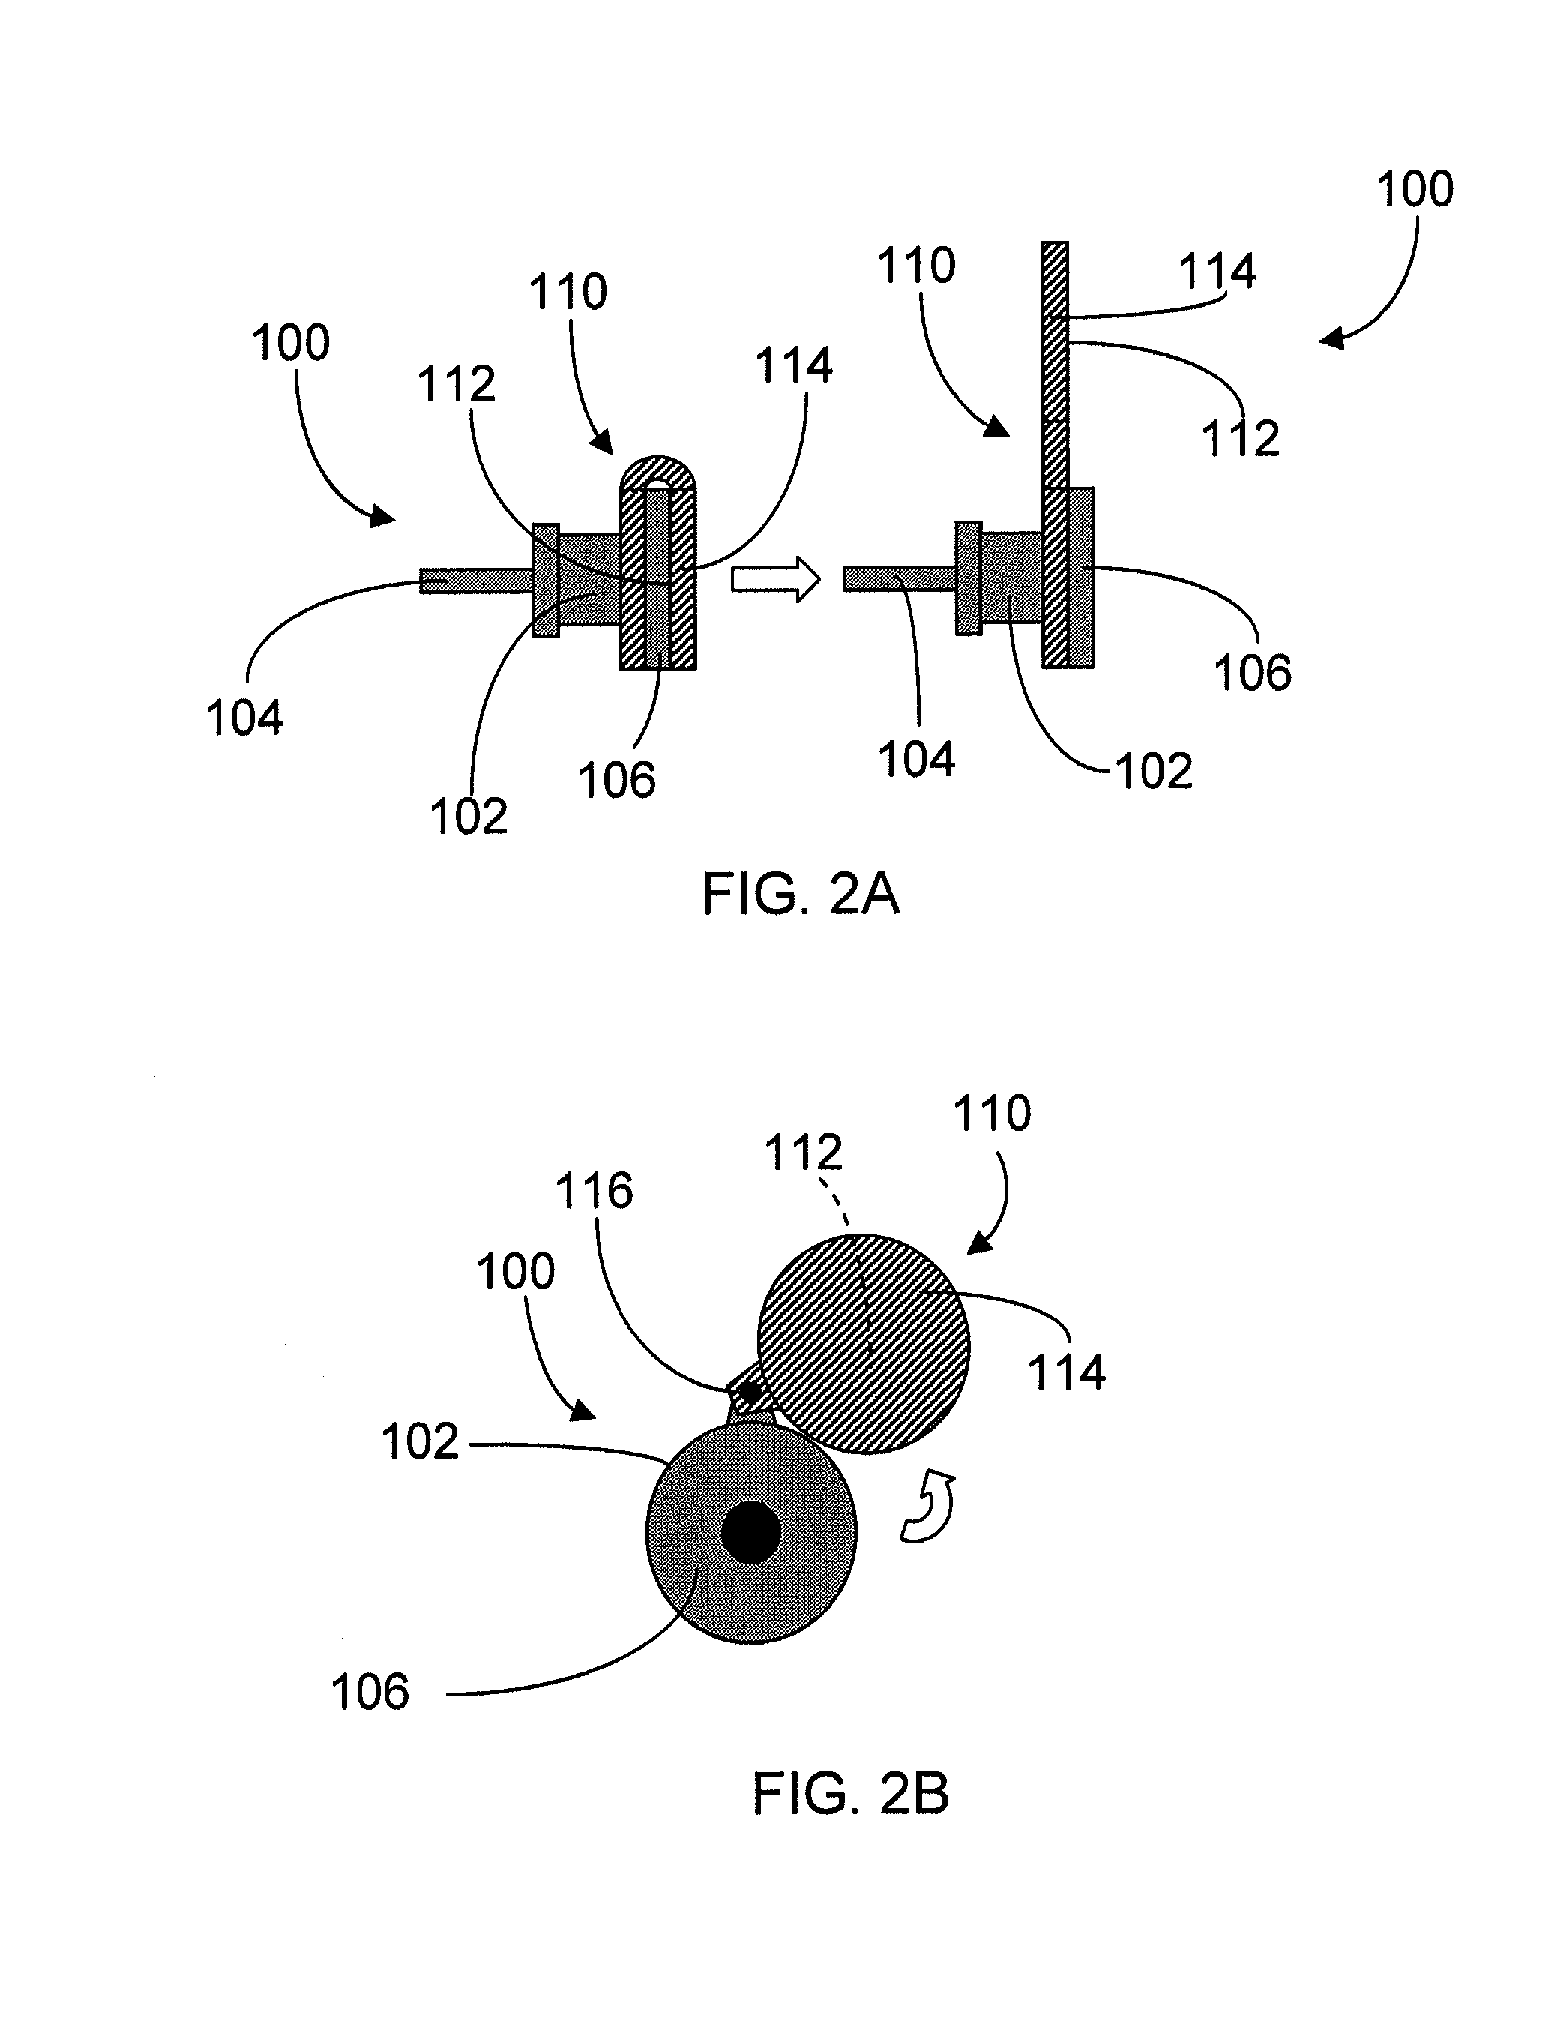 Sterilization device for a stethoscope and associated apparatus